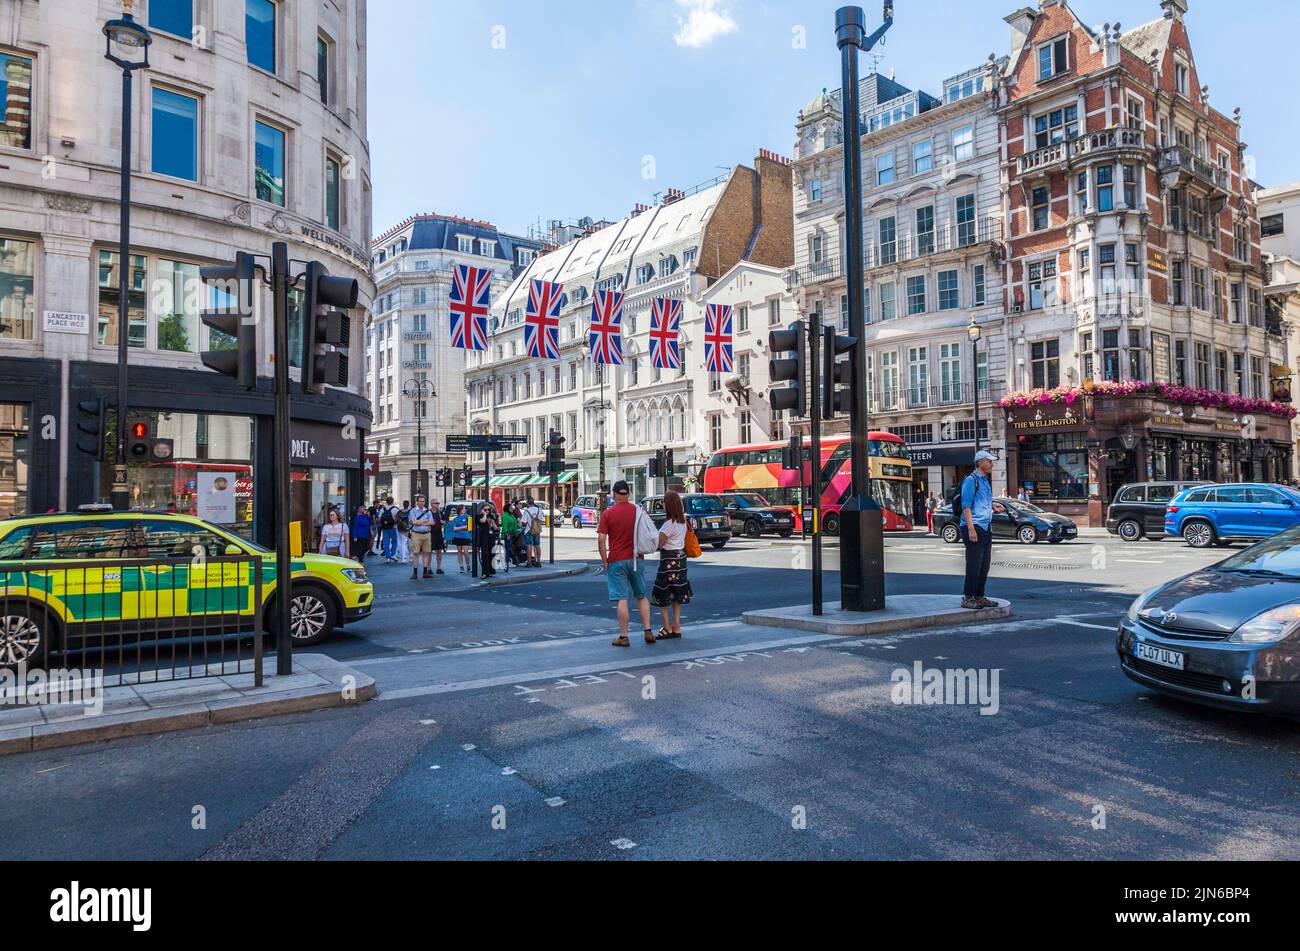 A street scene in the West End of London,England,UK with Union Jack flags draped across the street Stock Photo